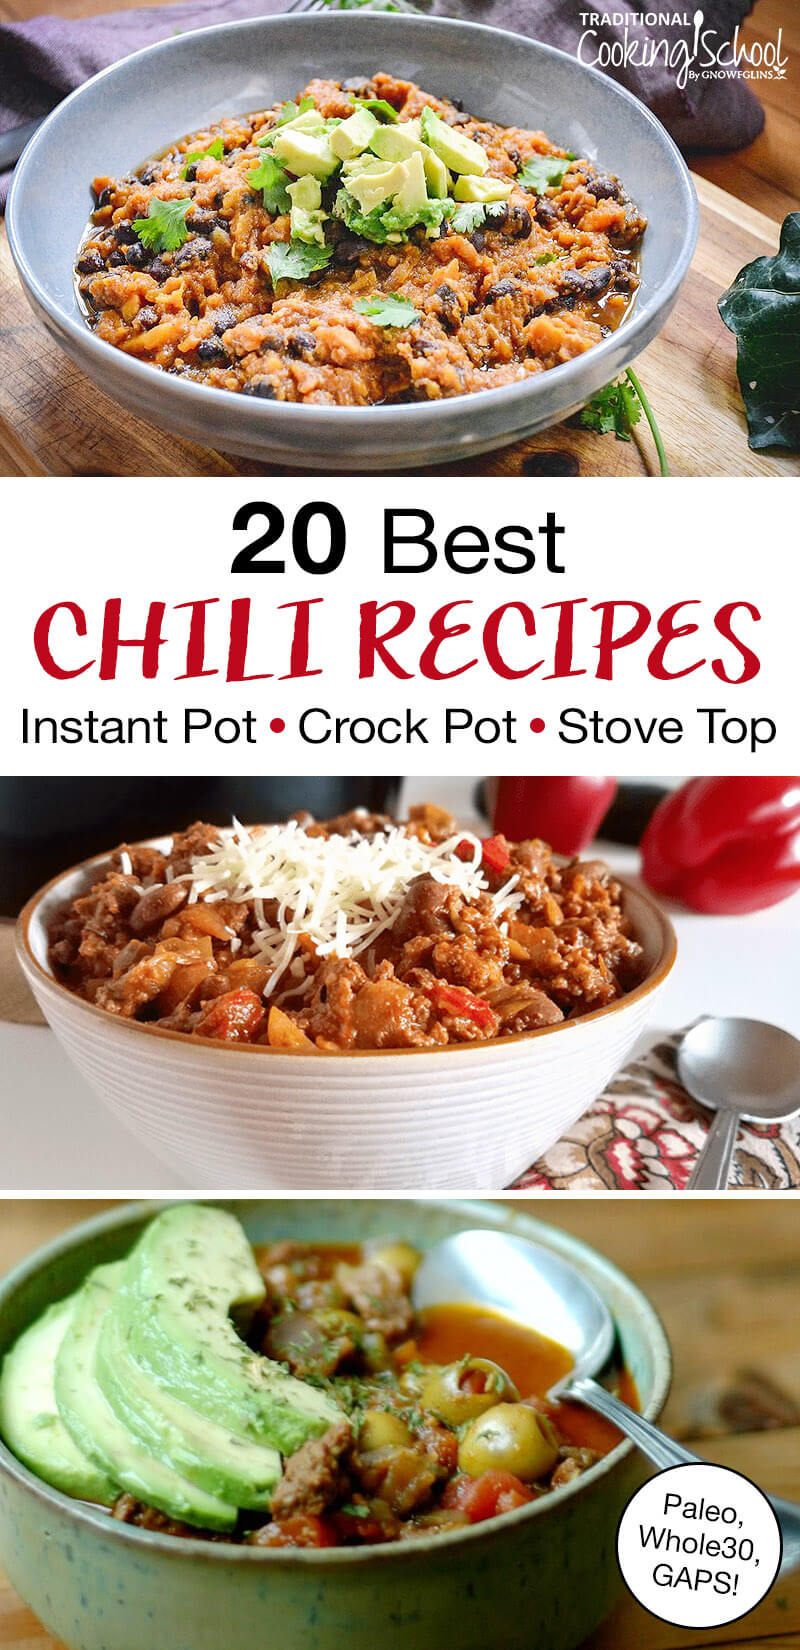 photo collage of bowls of chili with text overlay: "20 Best Chili Recipes For Instant Pot, Crock Pot, Stove Top (Paleo, Whole30, GAPS!)"